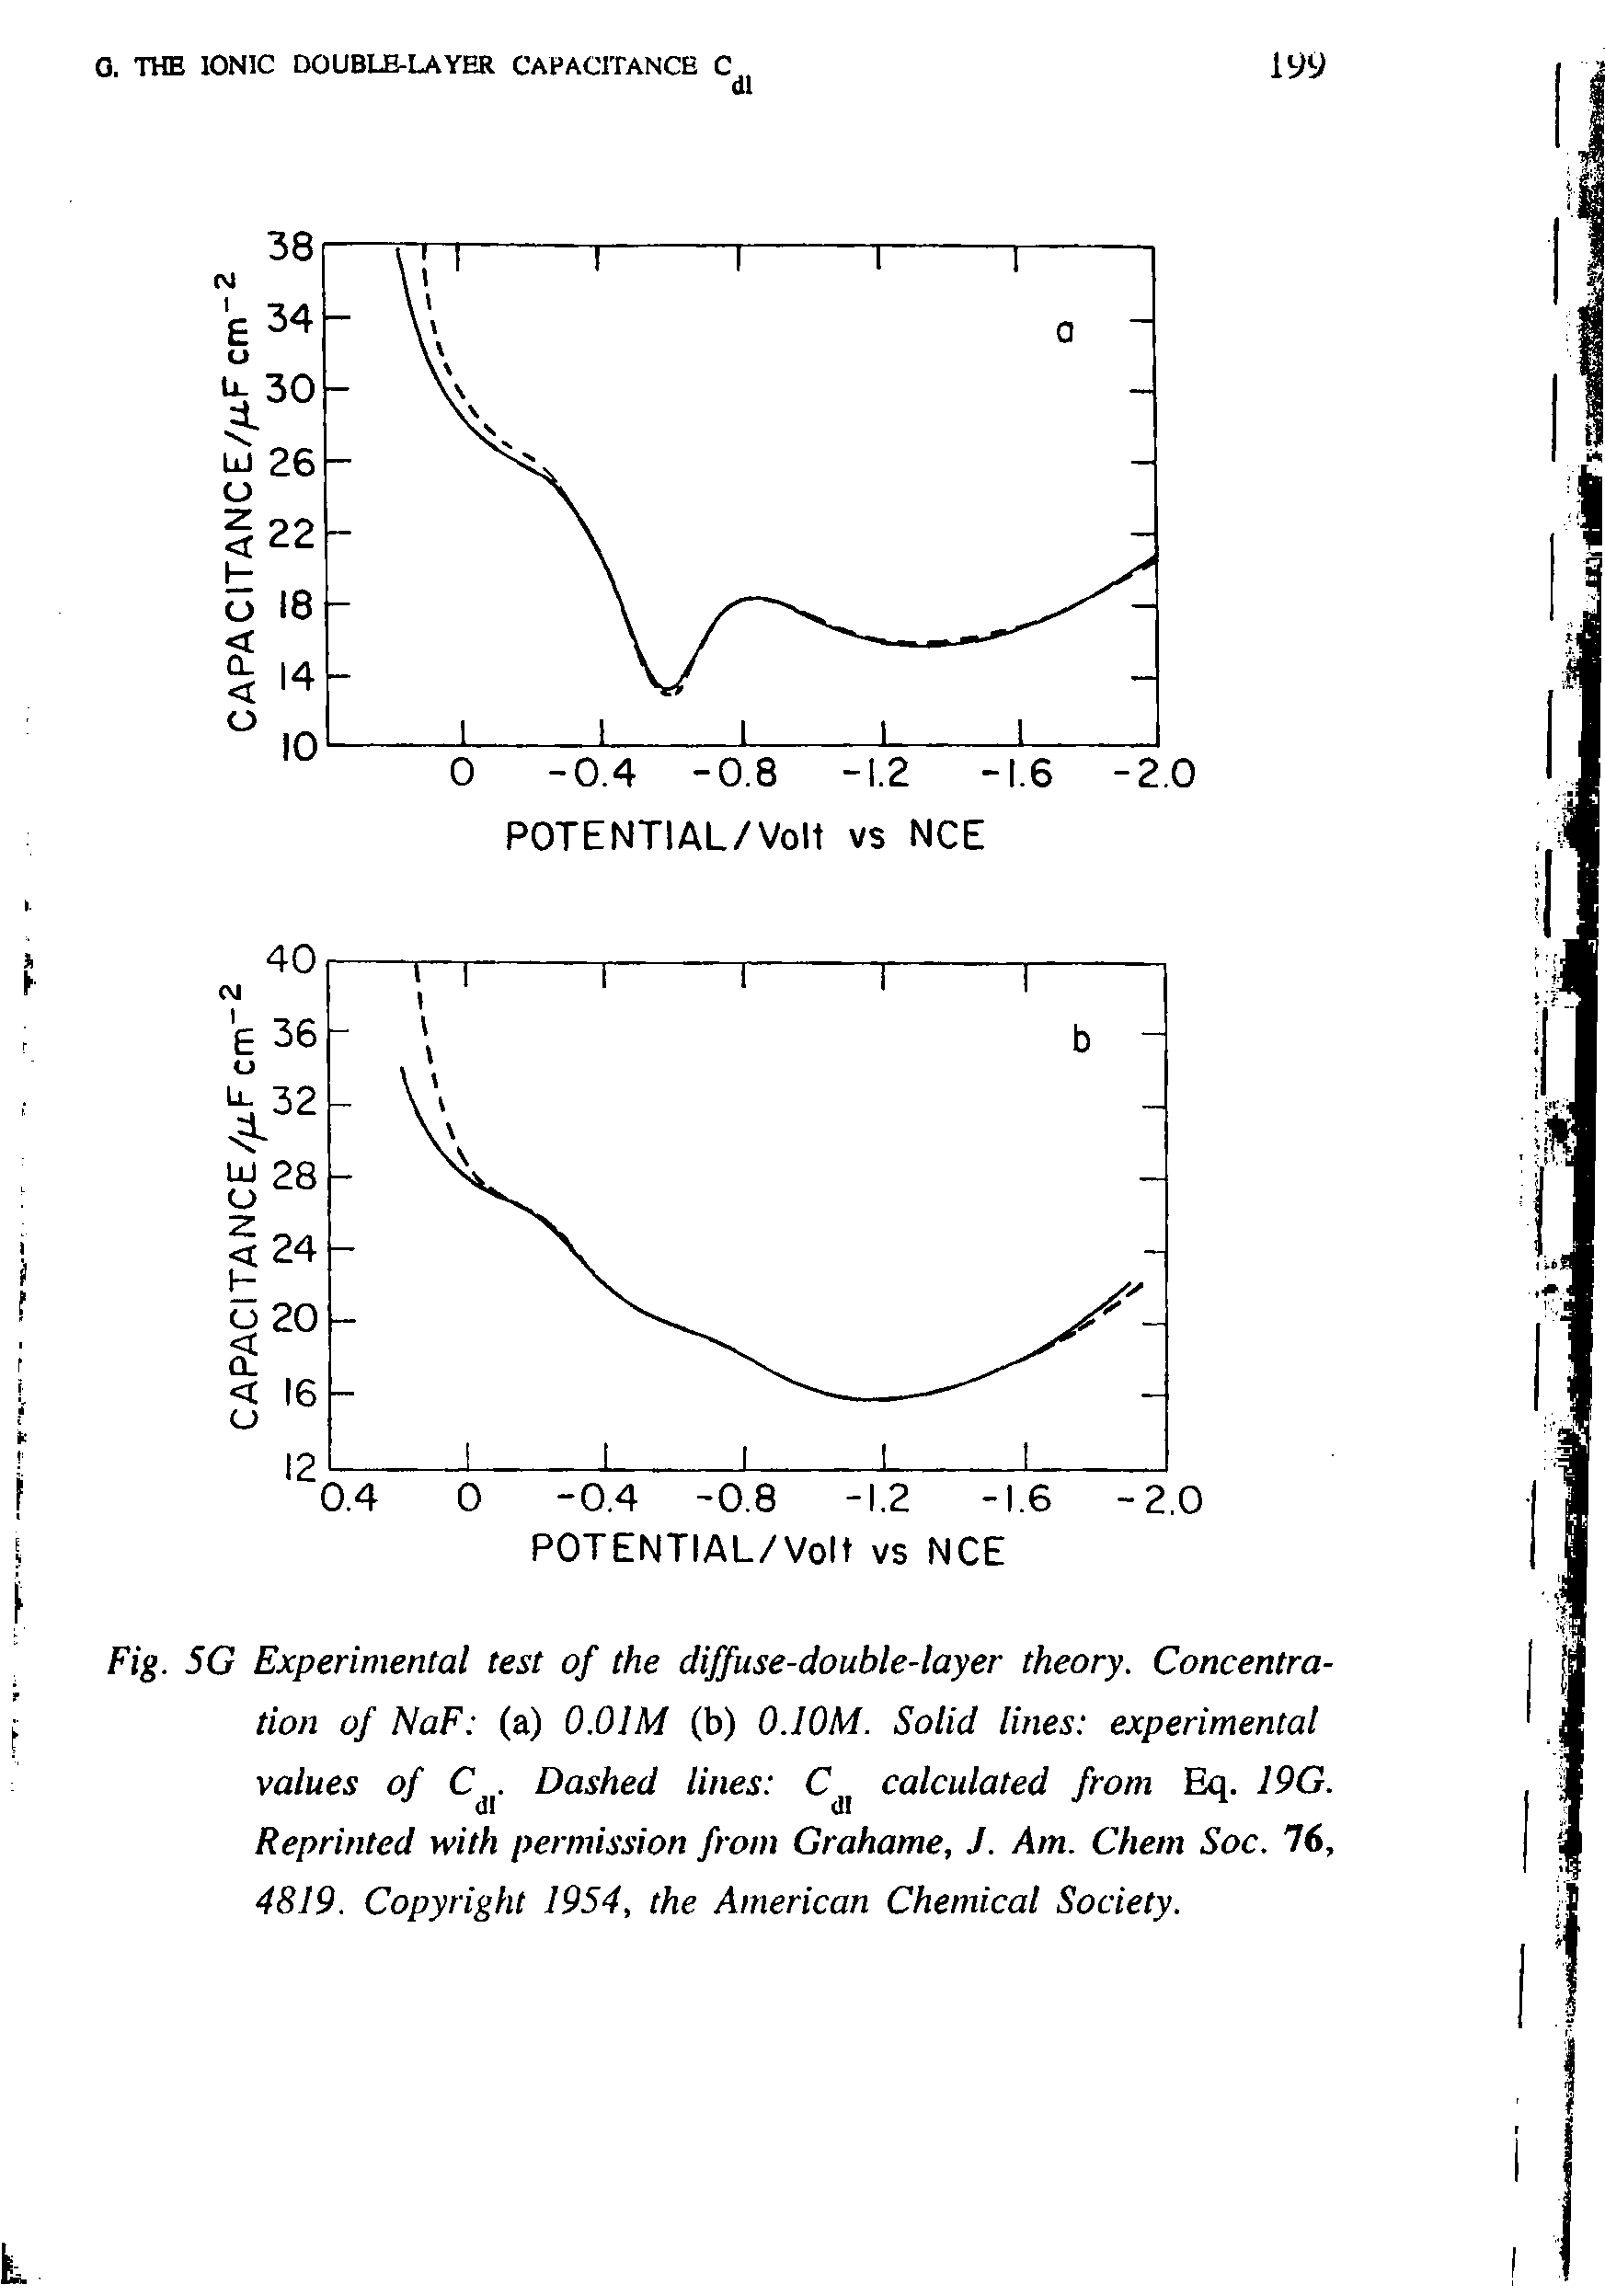 Fig. 5G Experimental test of the diffuse-double-layer theory. Concentration of NaF (a) O.OIM (b) O.IOM. Solid lines experimental values of C. Dashed lines C calculated from Eq. 19G. Reprinted with permission from Grahame, J. Am. Chem Soc. 76, 4819. Copyright 1954, the American Chemical Society.